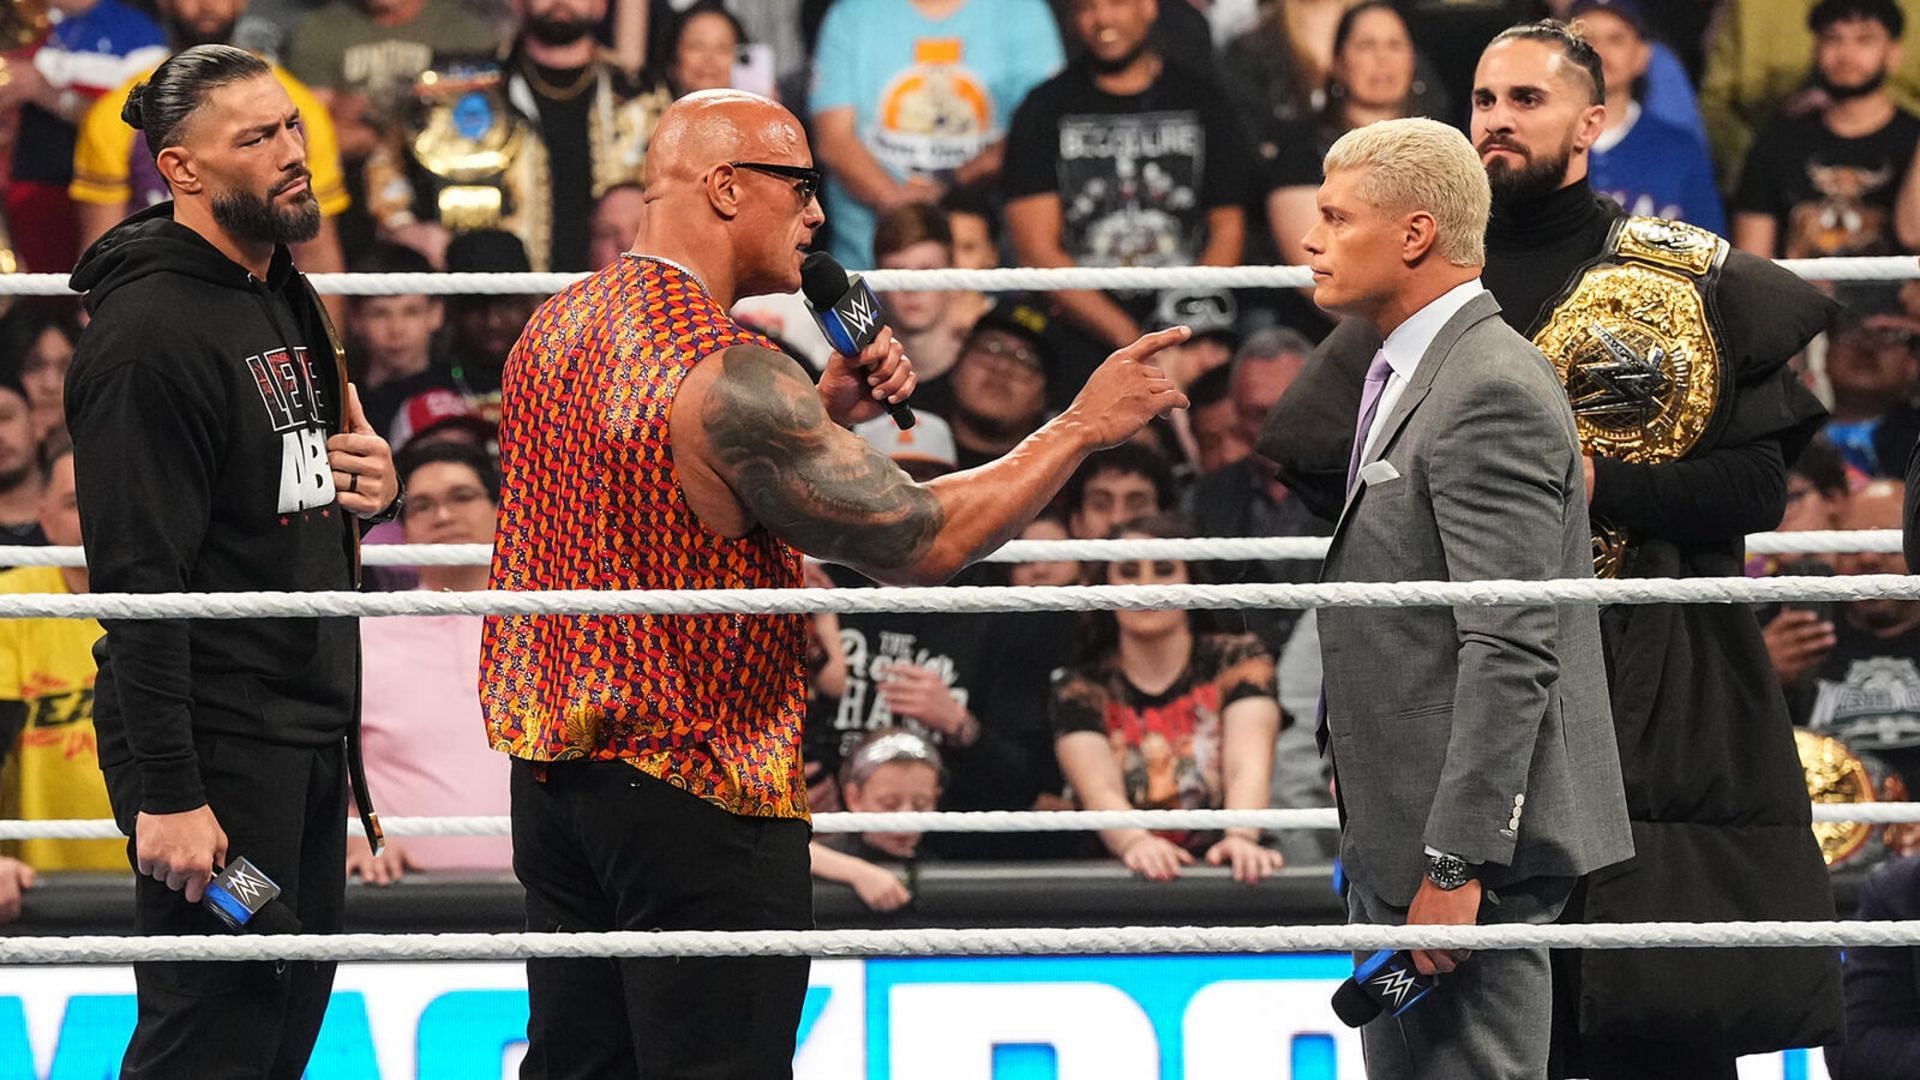 The Rock and Roman Reigns will face Cody Rhodes and Seth Rollins at WWE WrestleMania XL